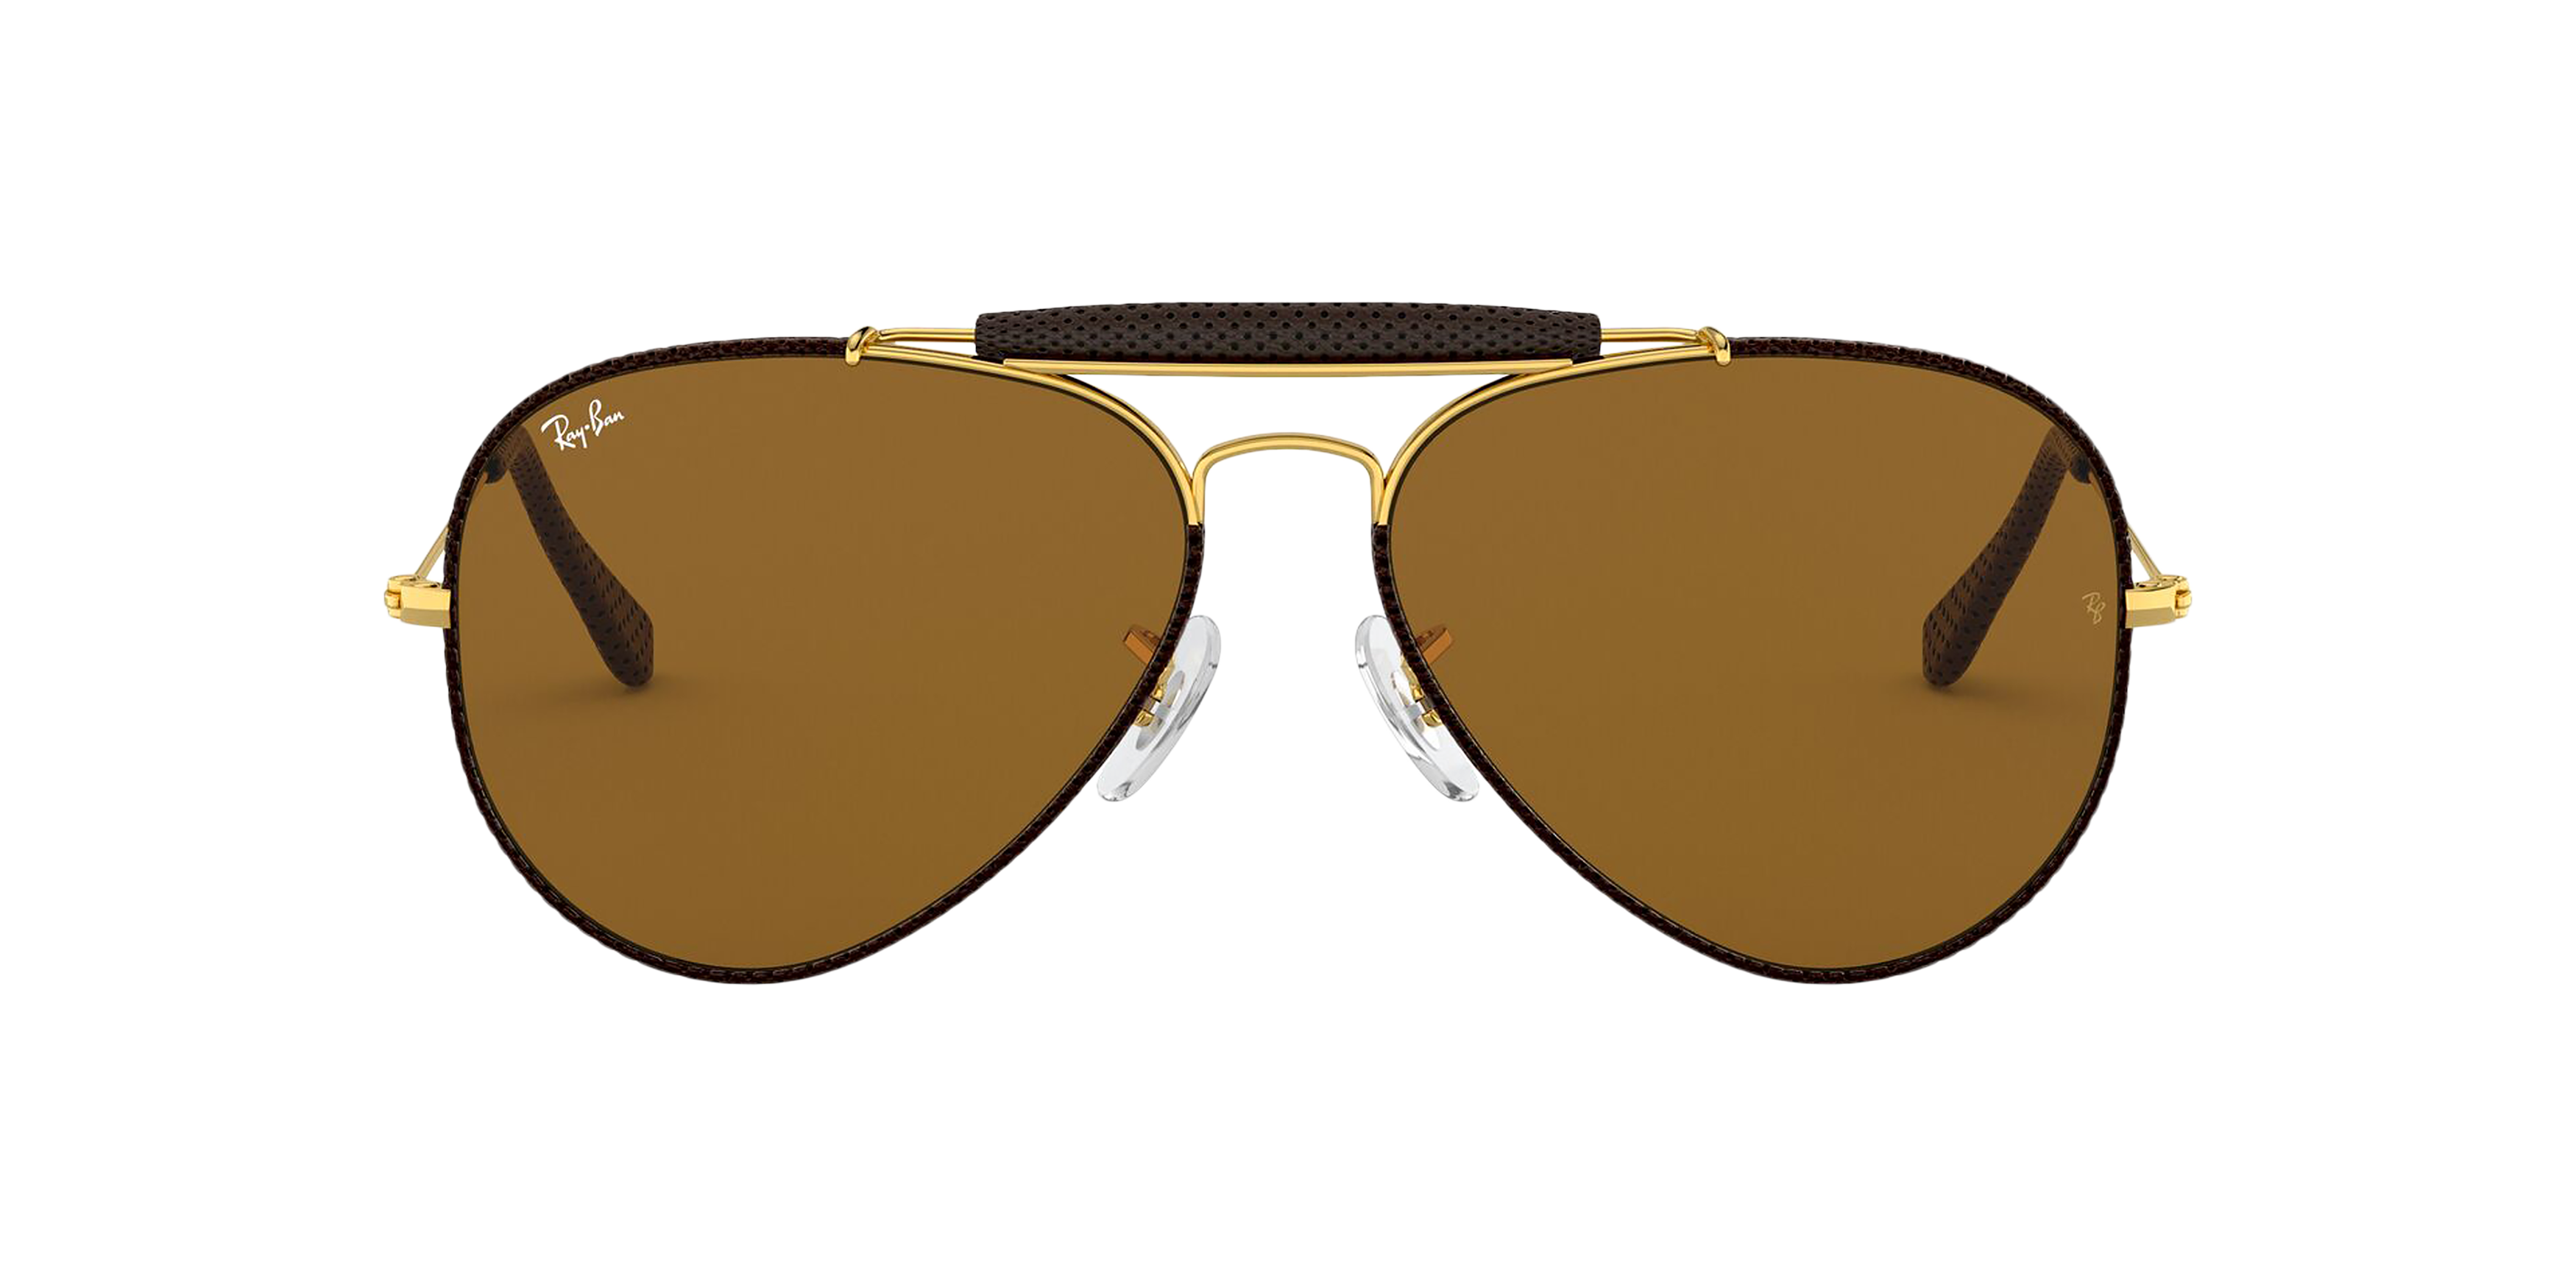 [products.image.front] Ray-Ban Aviator Craft RB3422Q 9041